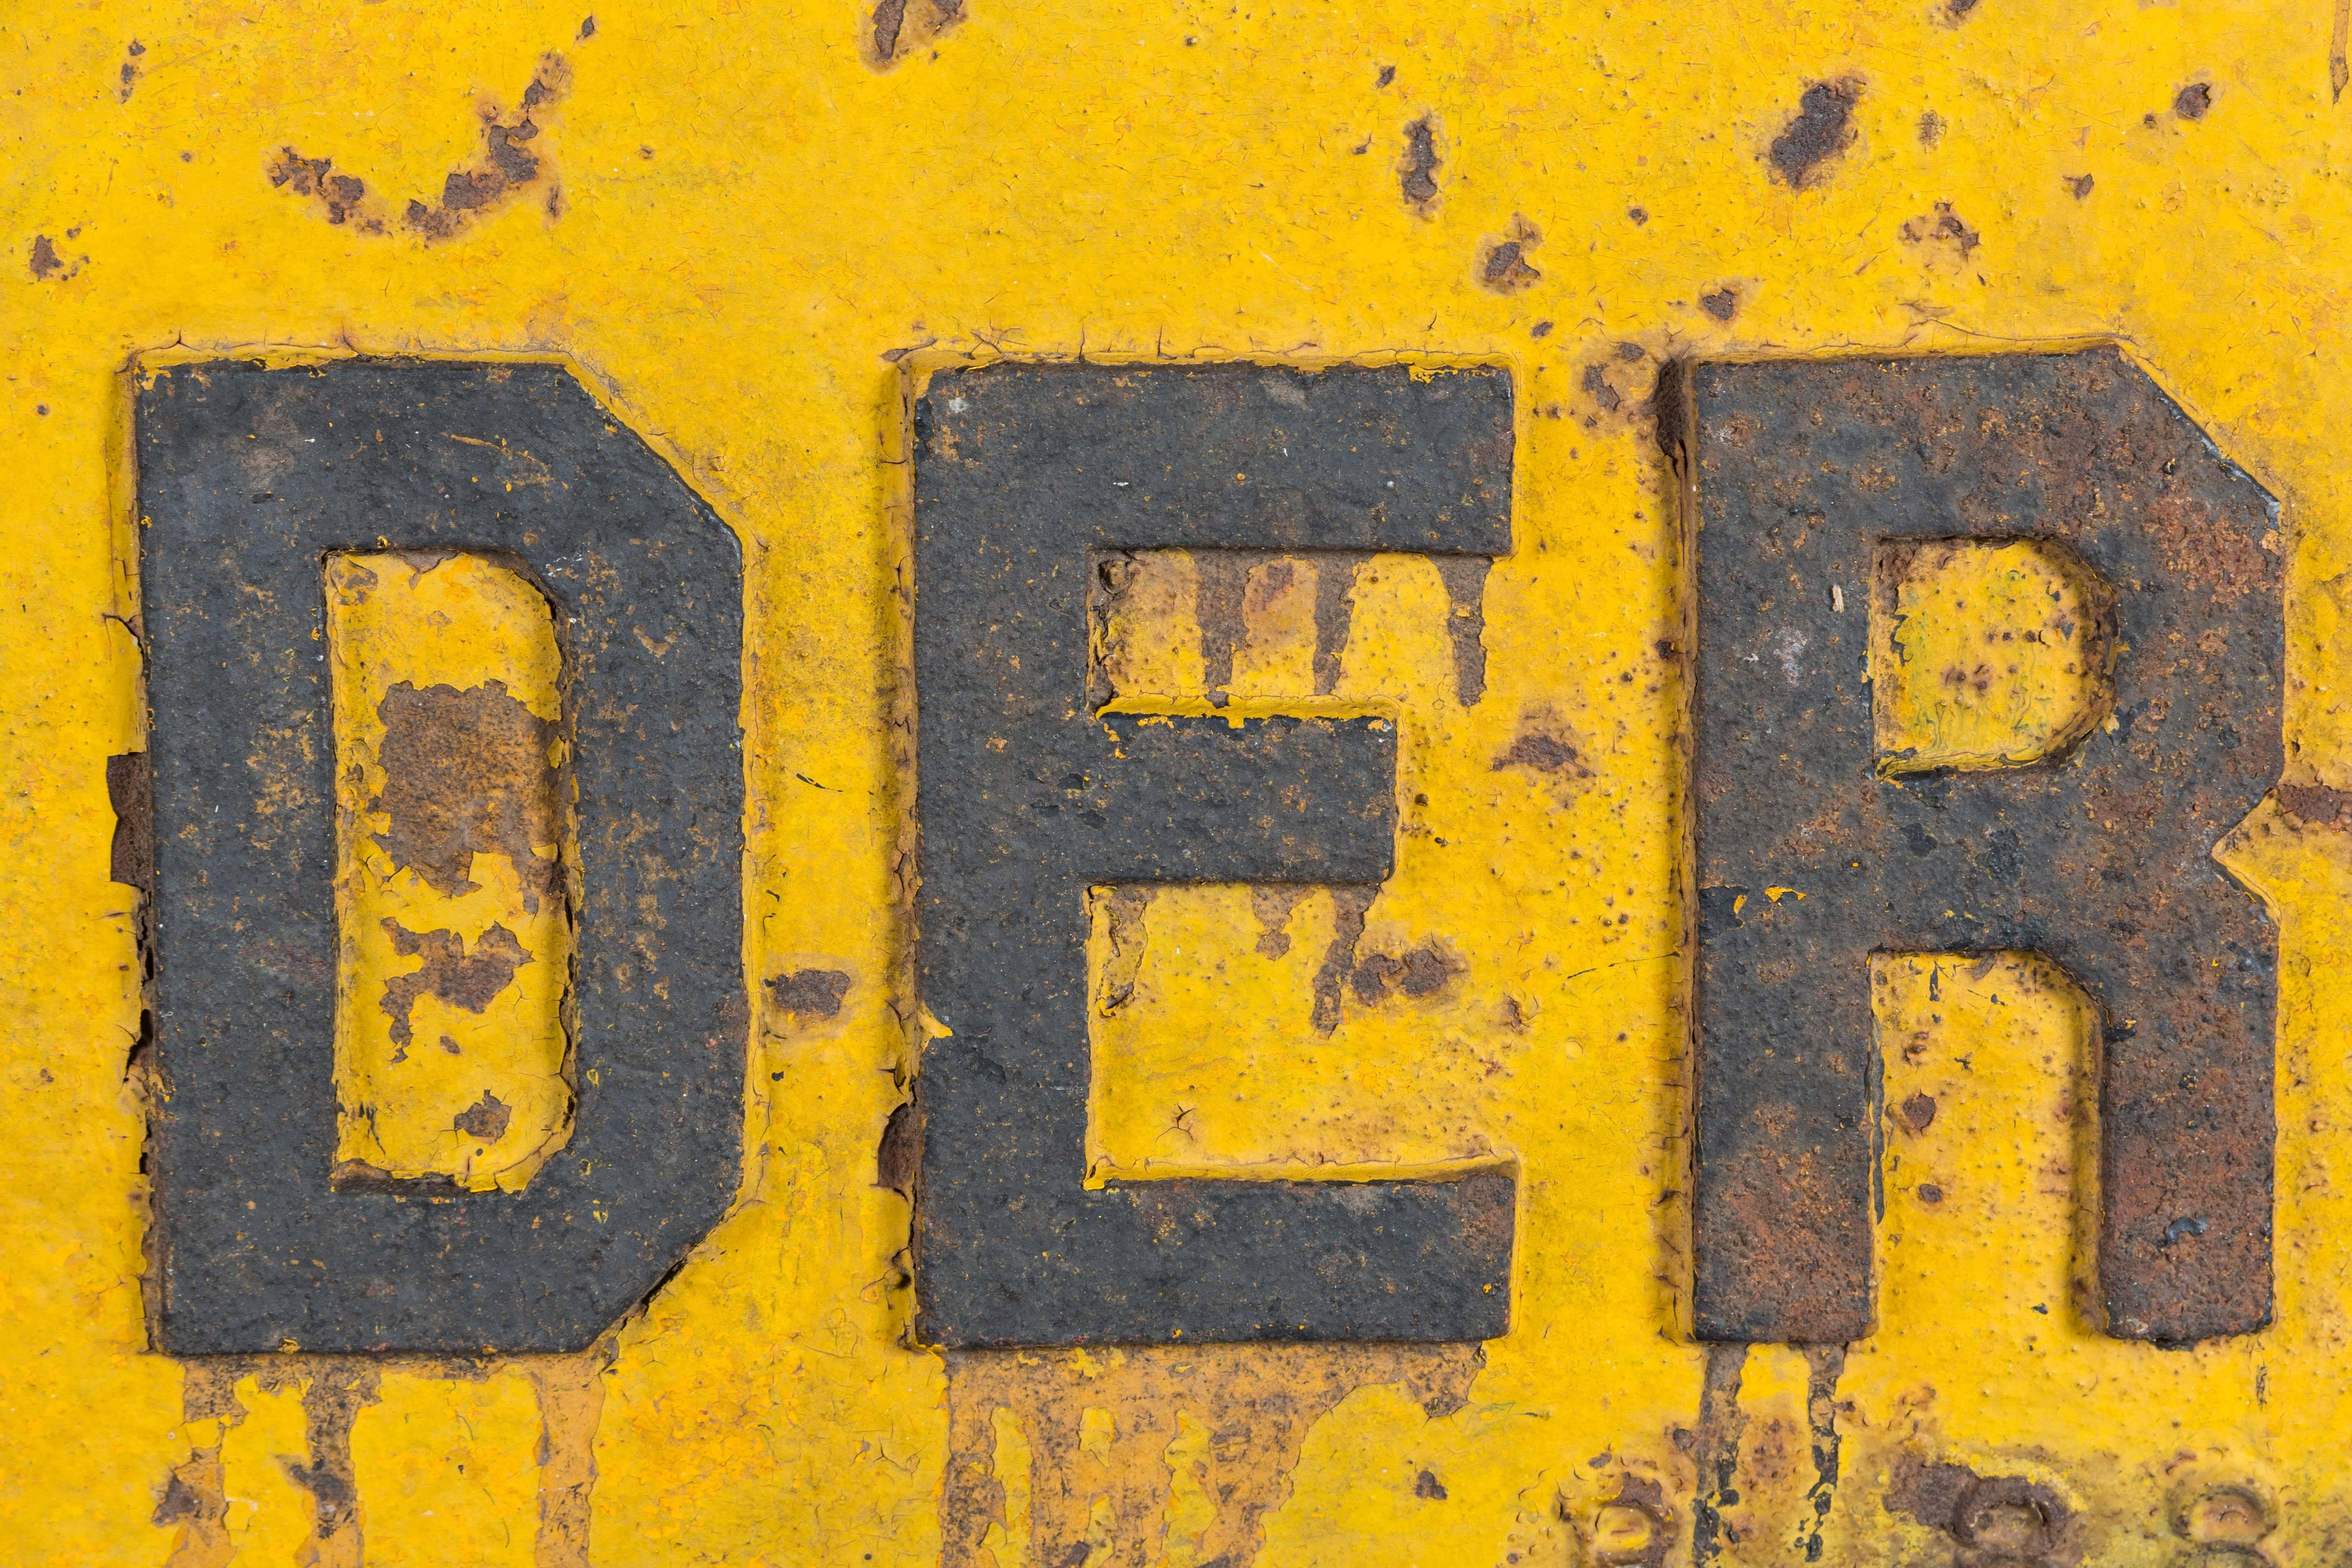 Very thick cast iron DERAIL sign, early 20th century American railroad. Great original yellow and black paint. Two holes for easy mounting. This sign is quite heavy.